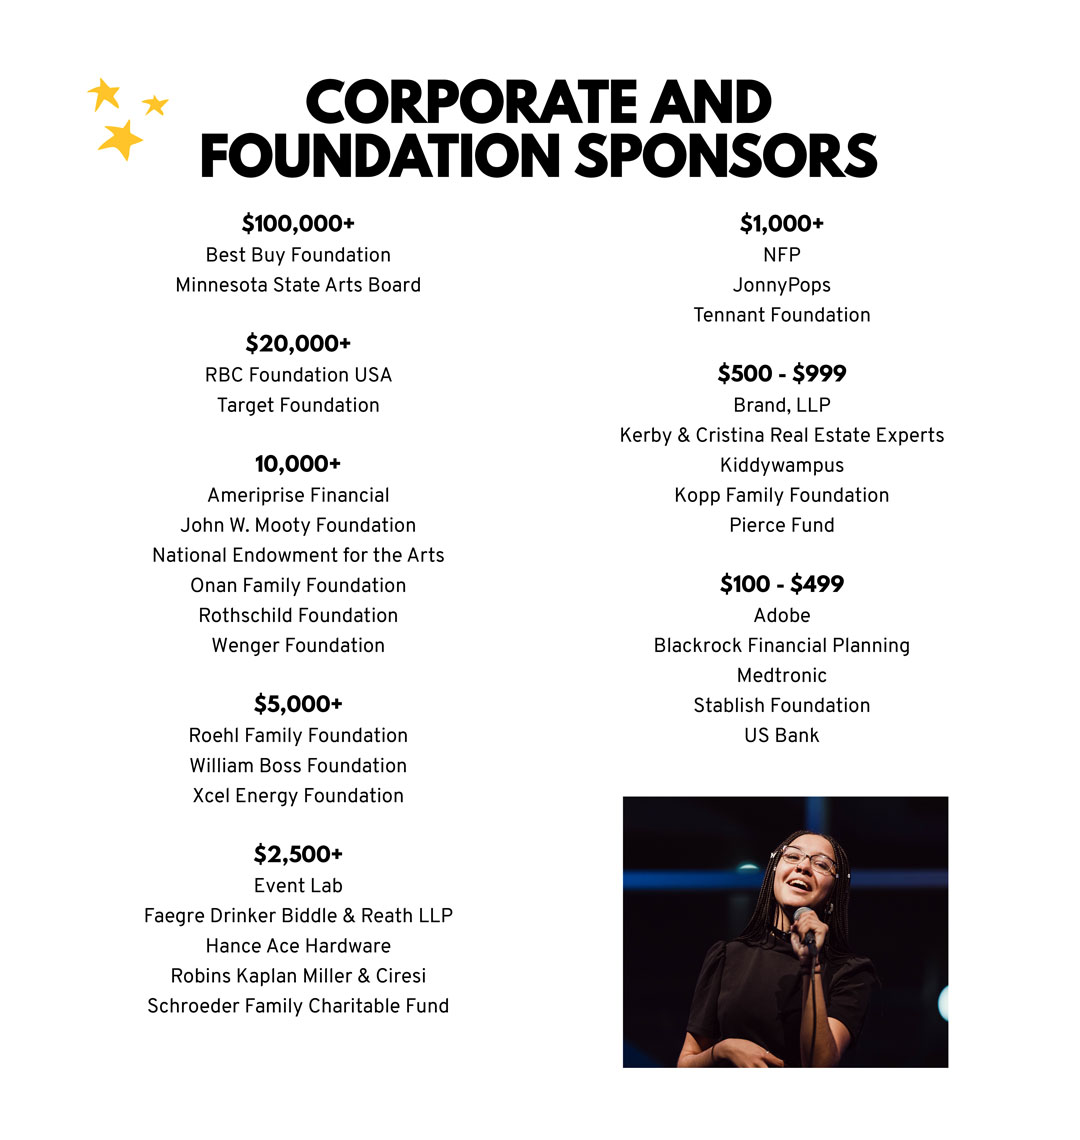 Corporate and Foundation Sponsors